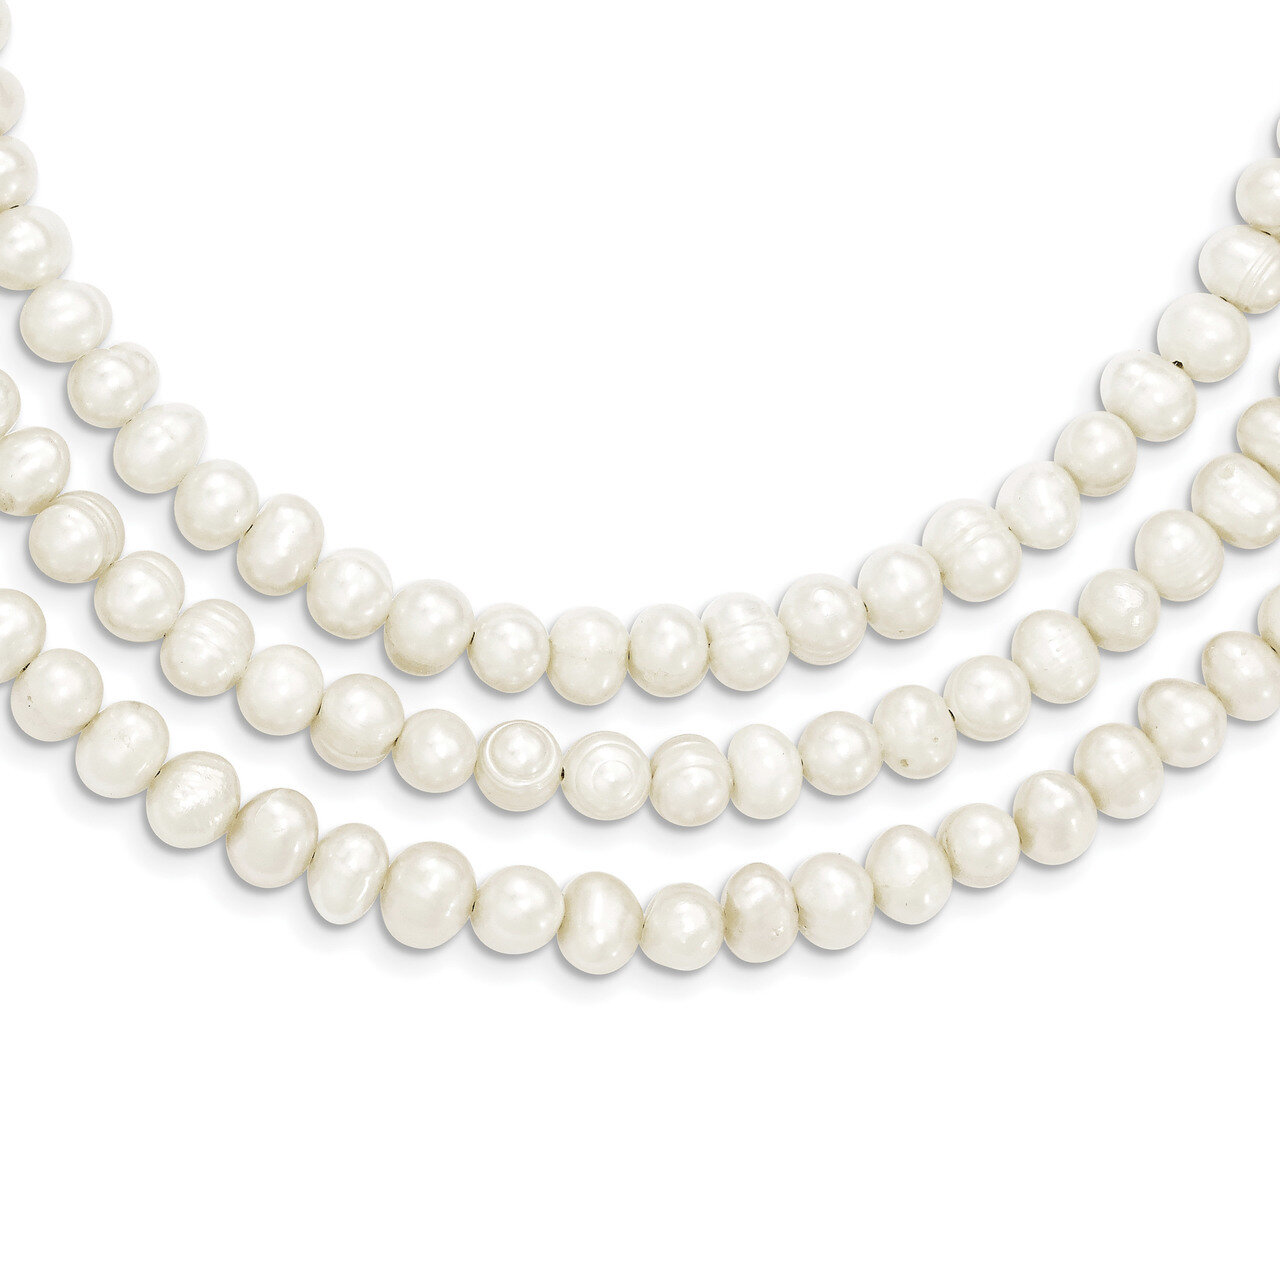 Triple Strand White Freshwater Cultured Pearl Necklace 19 Inch Sterling Silver QH2469-19